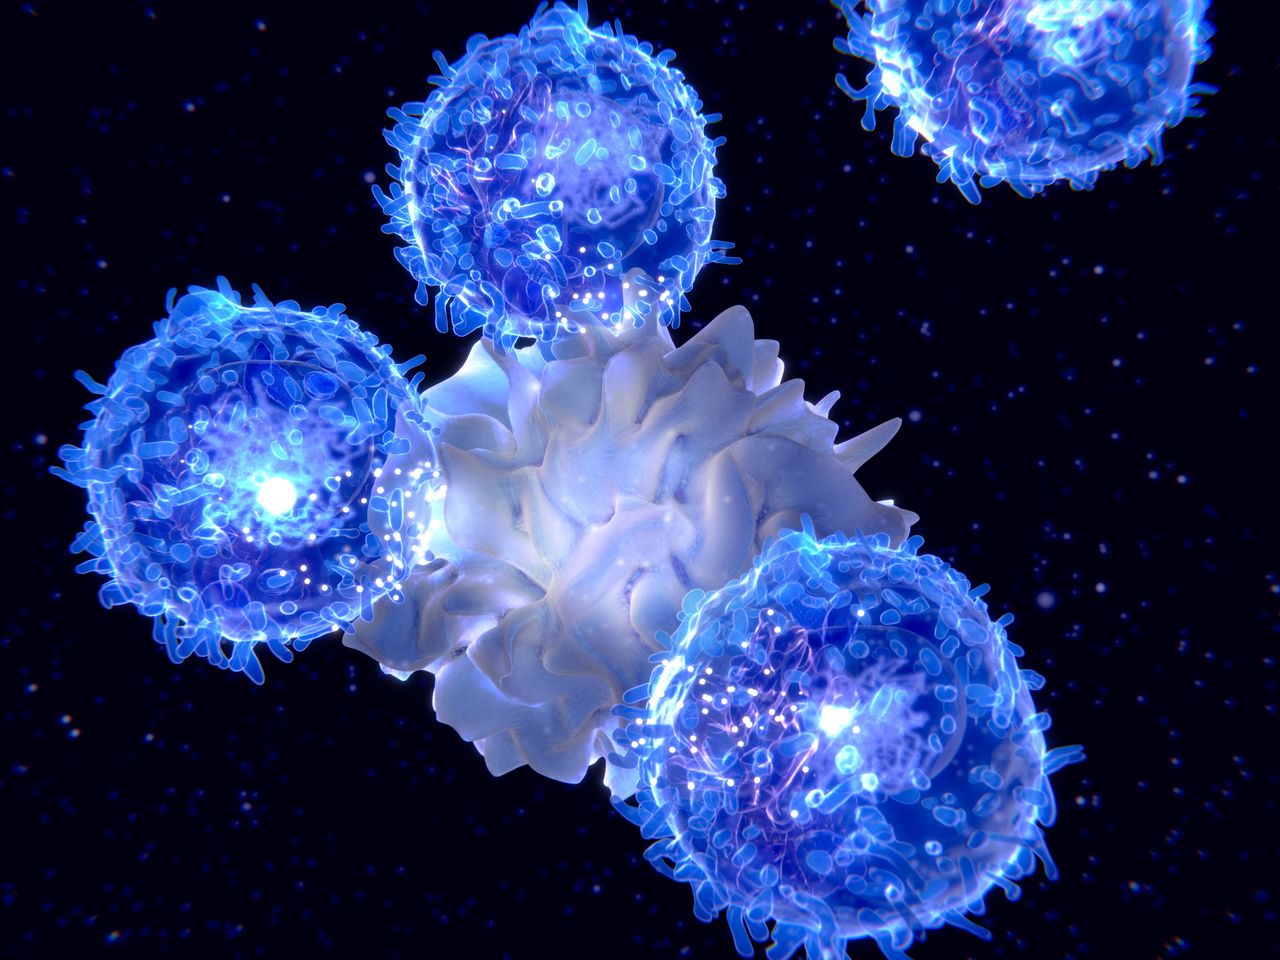 Case Study Highlights Potential Link Between TKIs and Lymphoplasmacytic Lymphoma